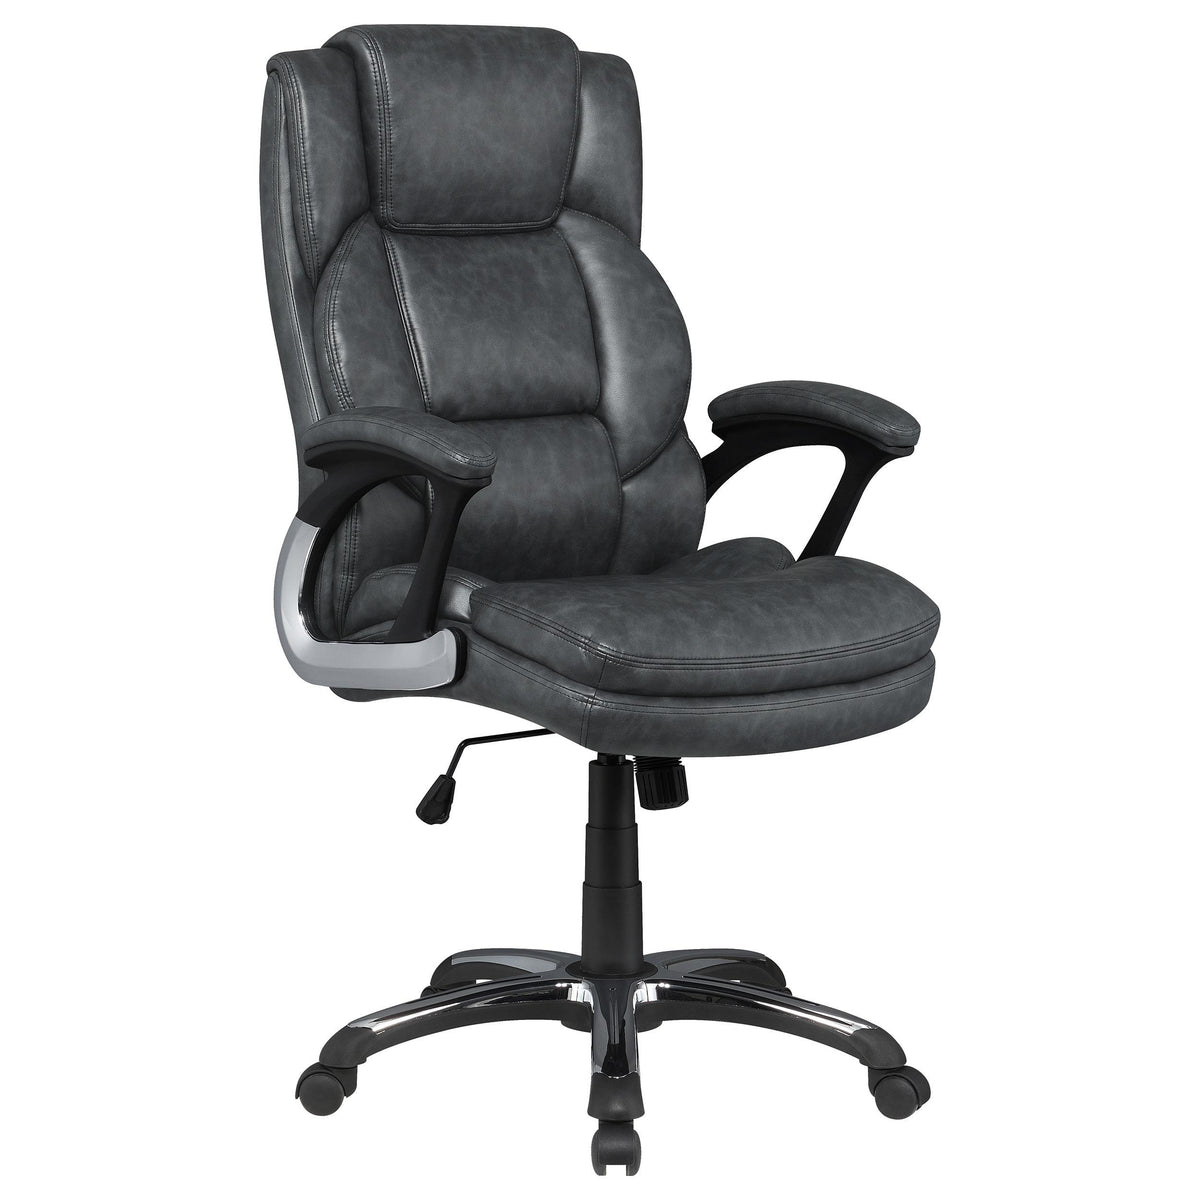 Nerris Adjustable Height Office Chair with Padded Arm Grey and Black Nerris Adjustable Height Office Chair with Padded Arm Grey and Black Half Price Furniture